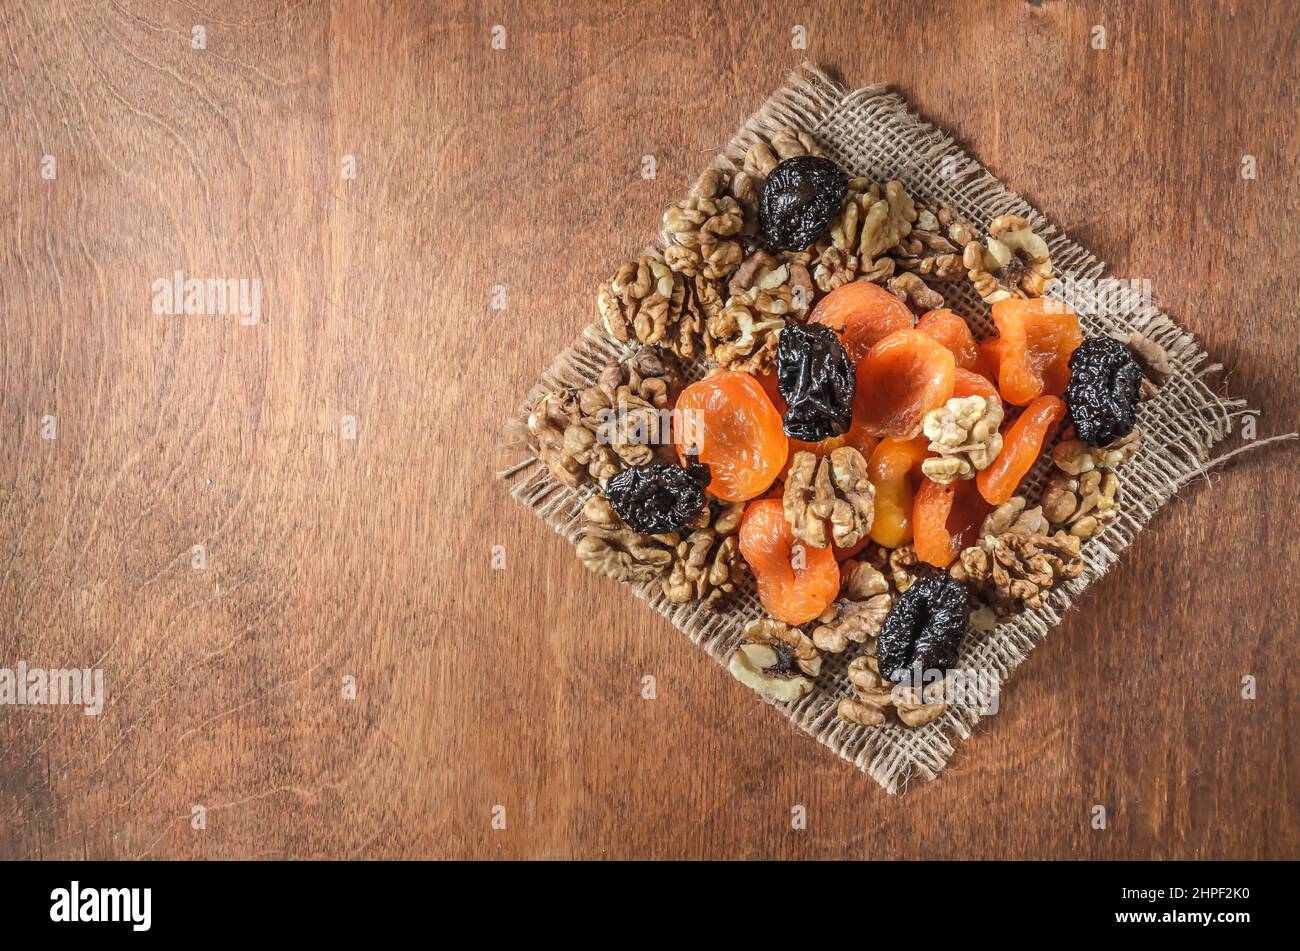 nuts and other fruits on a wooden background Stock Photo